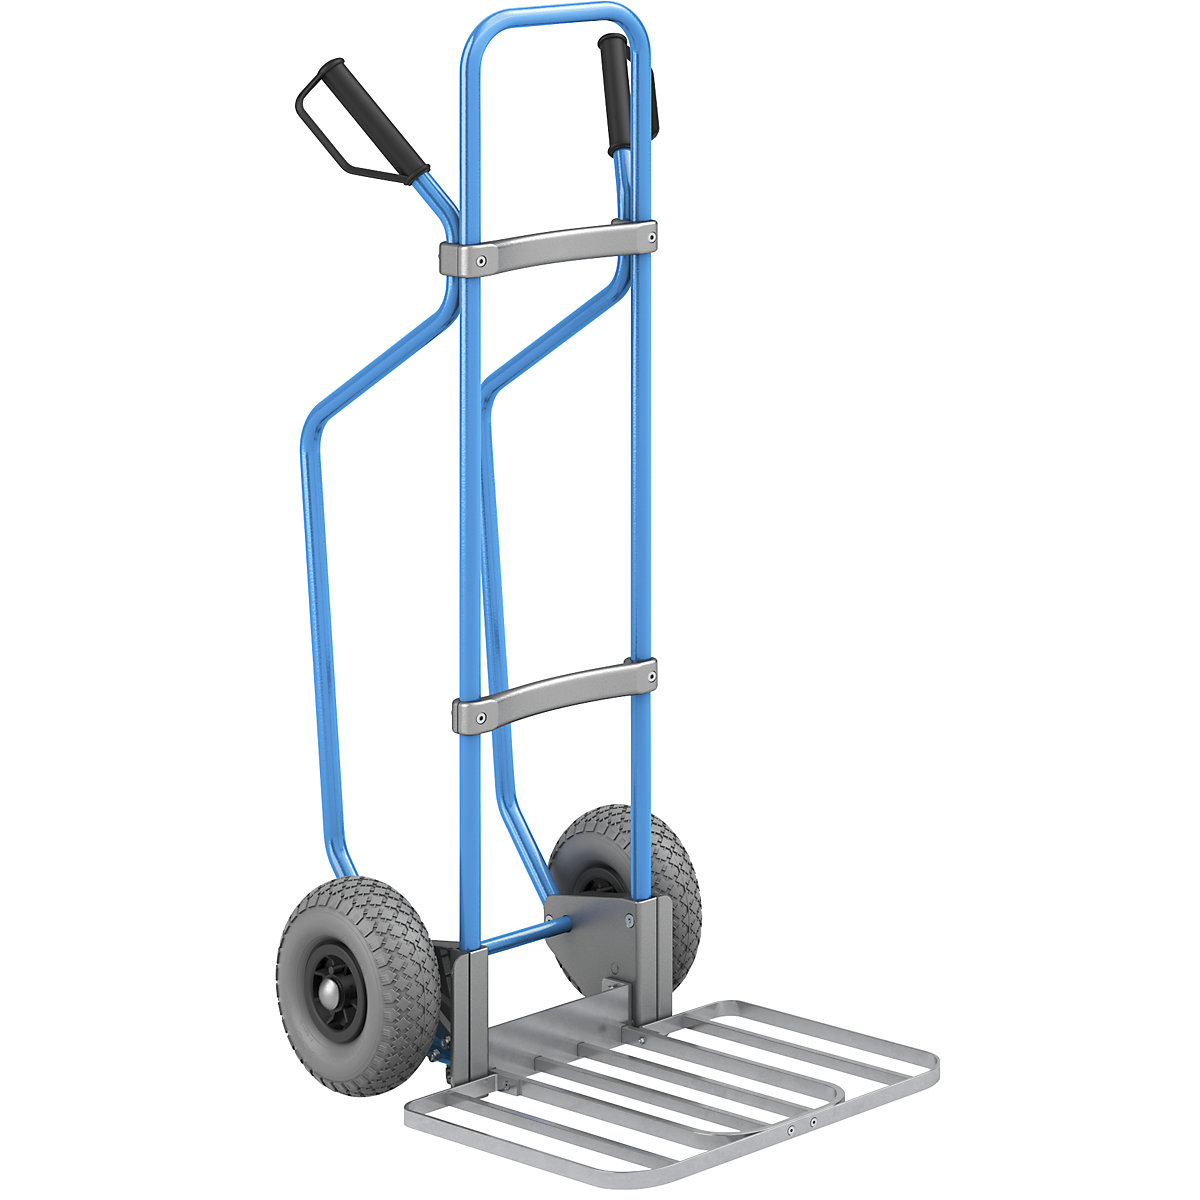 Sack truck with runners, blue – eurokraft pro, parcel footplate WxD 430 x 450 mm, zinc plated, PU tyres-2